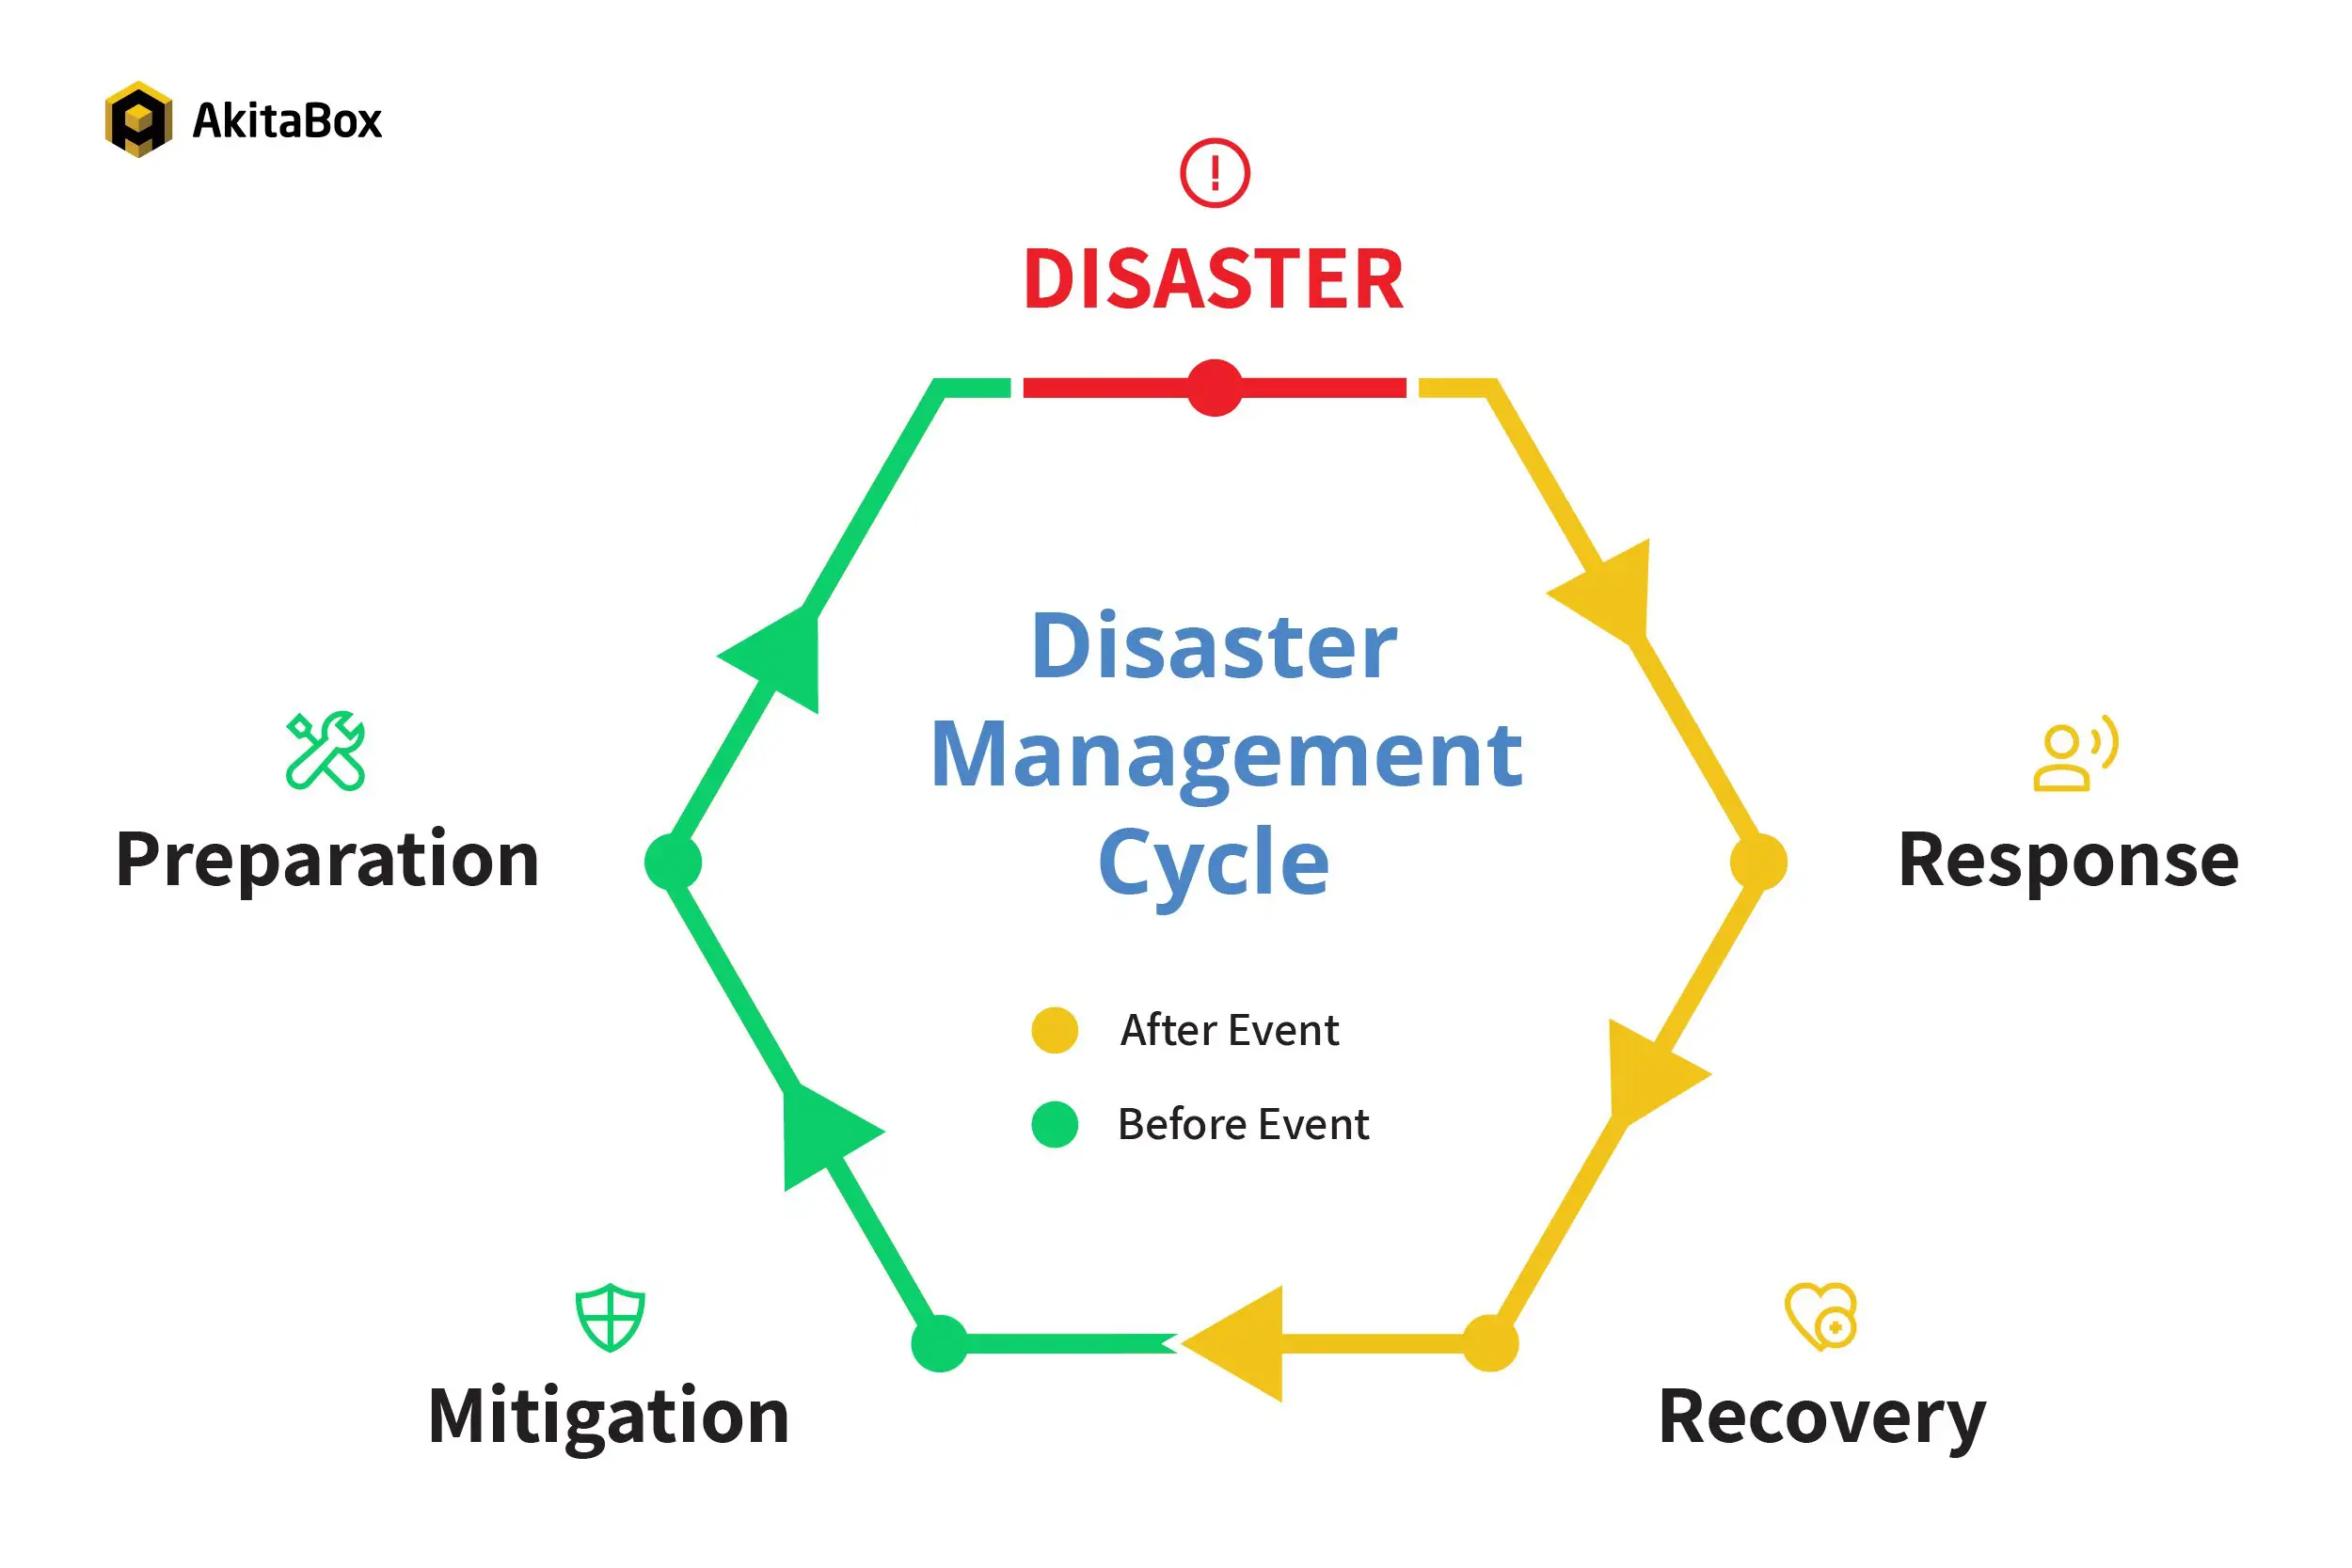 What are the 4 methods involved in disaster mitigation?